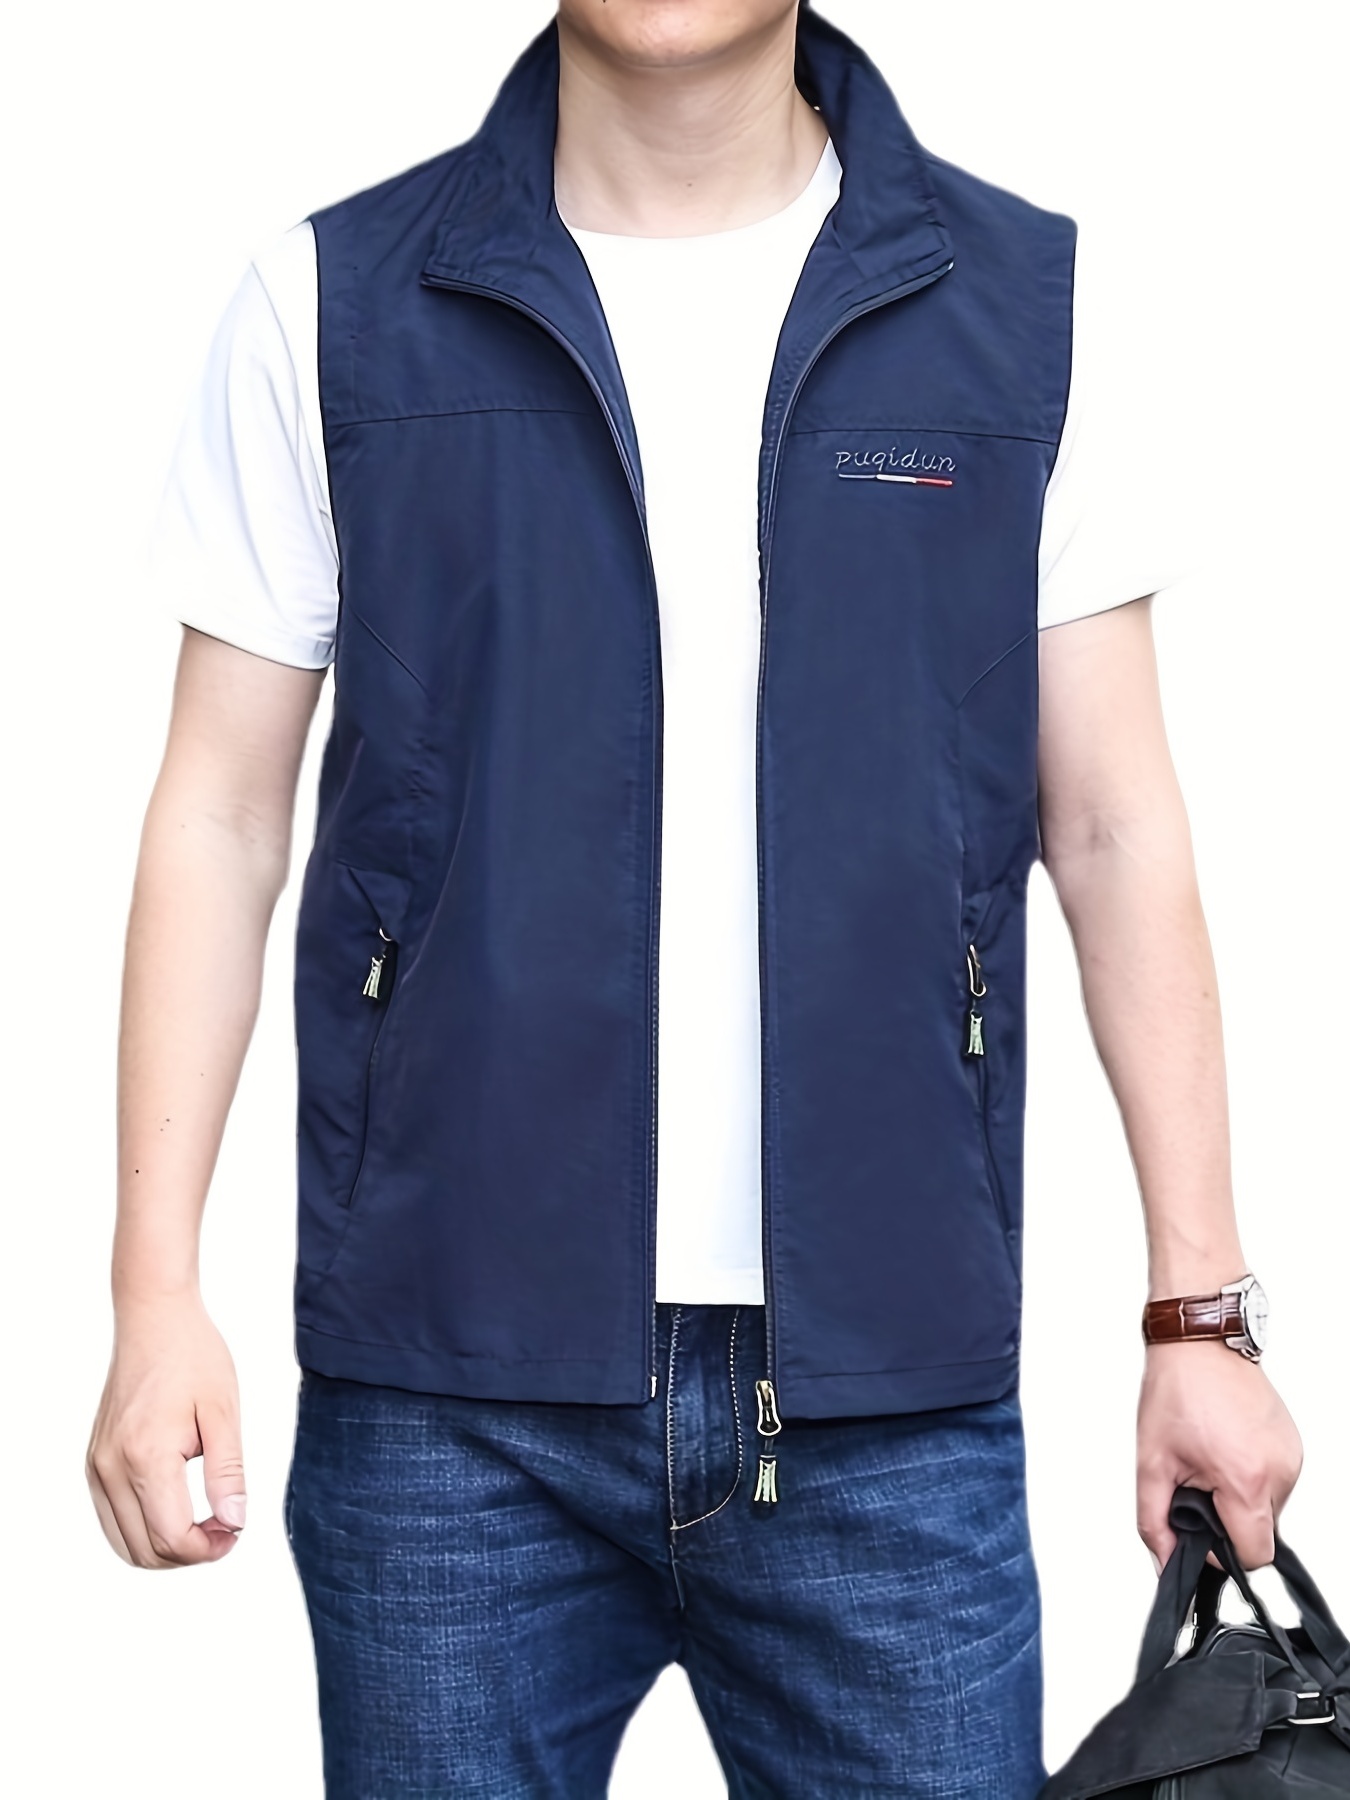 Classic Design Zipper Pockets Cargo Vest, Men's Casual Stand Collar Zip Up  Vest For Spring Summer Outdoor Fishing Photography